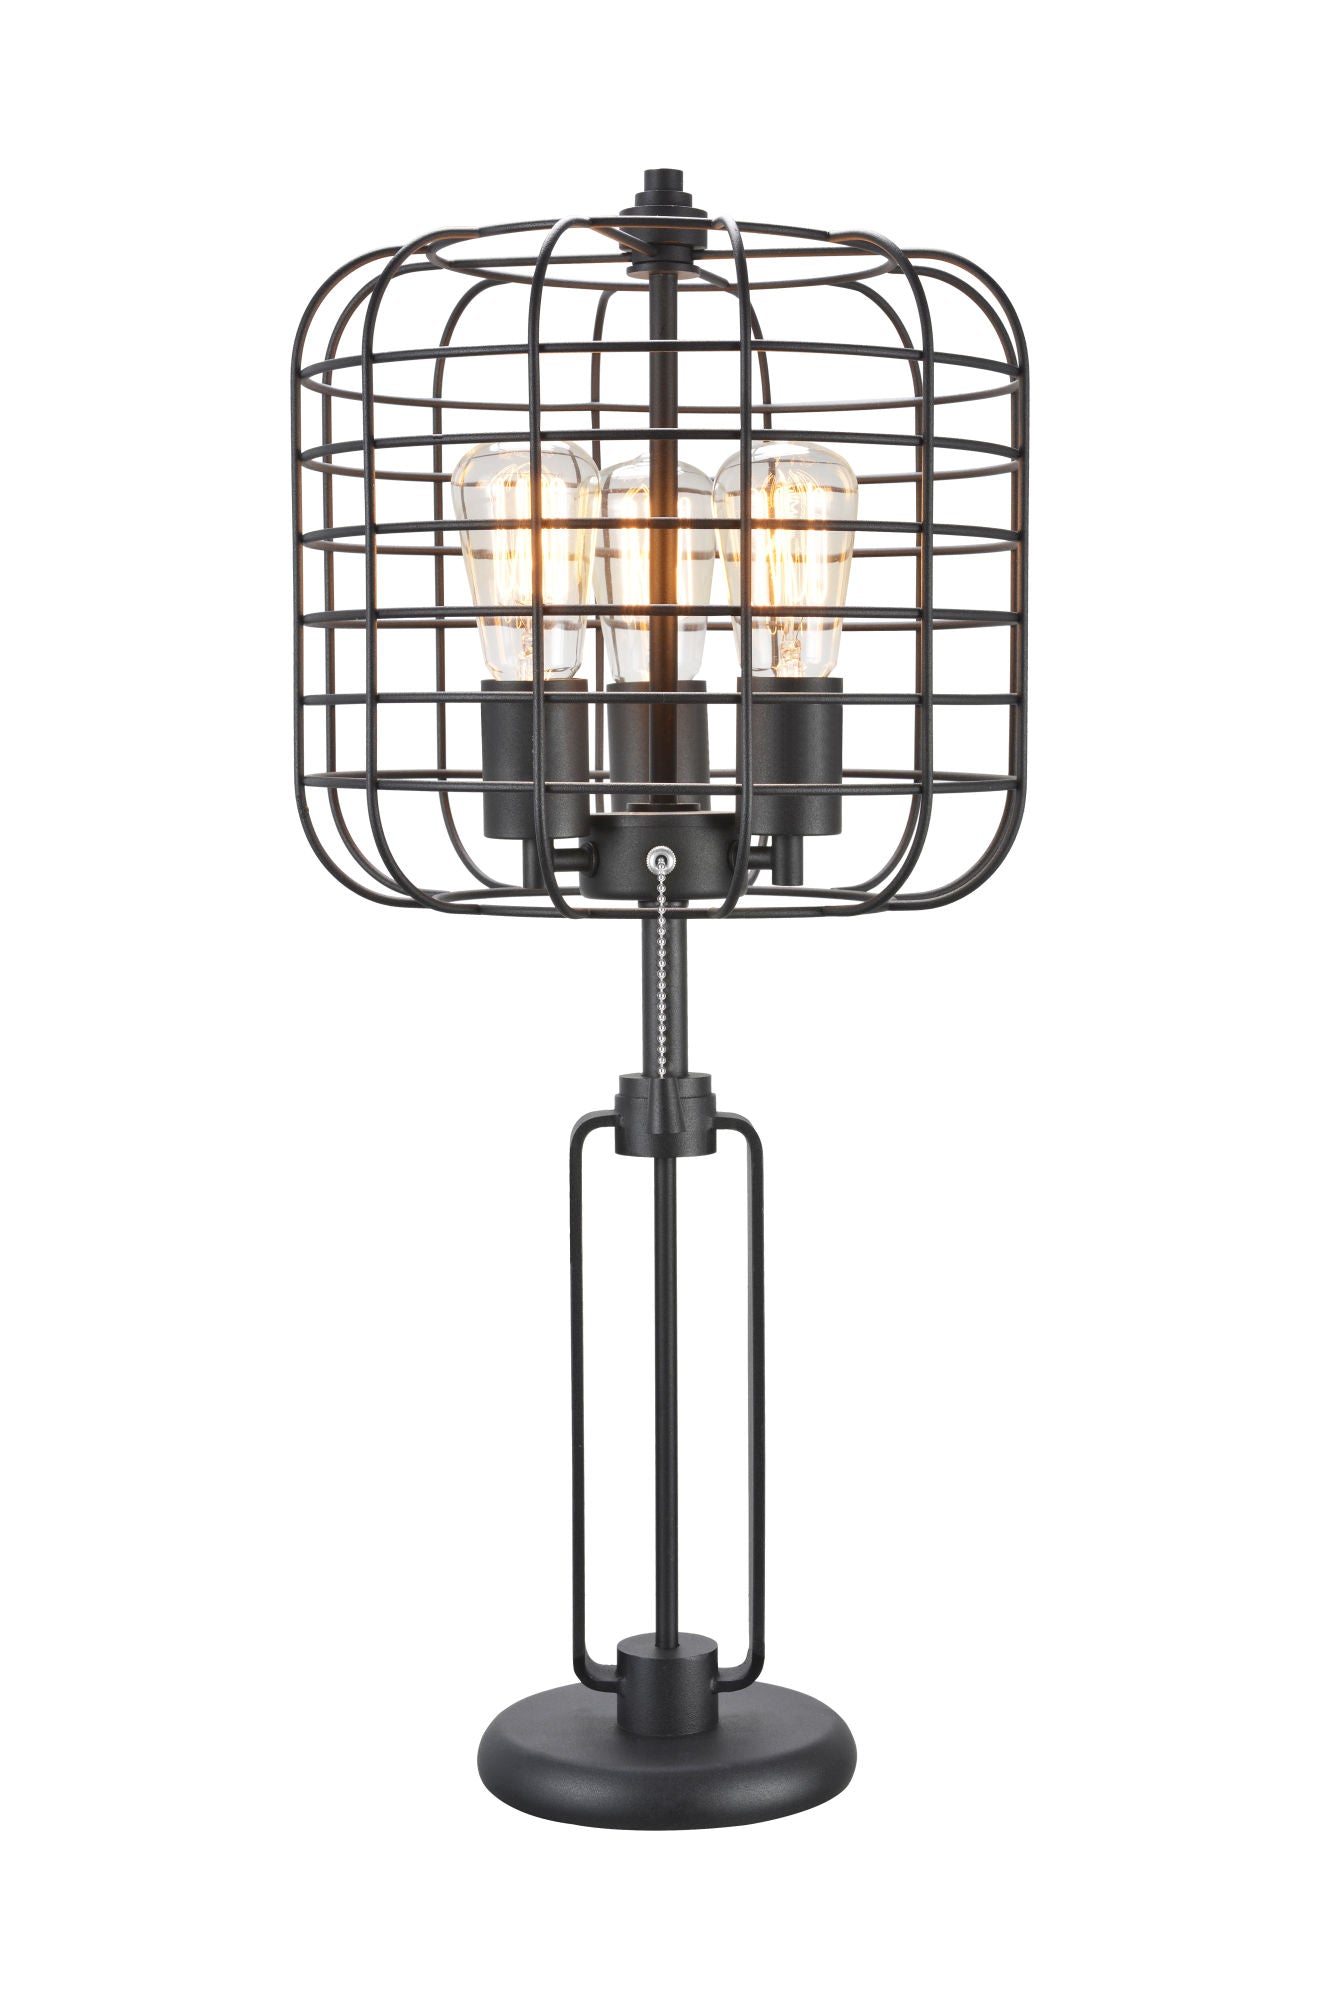 26"H BLACK INDUSTRIAL WIRE CAGE TABLE LAMP W/ EDISON BULB (1PCS/CNT)(2.96/14.43)